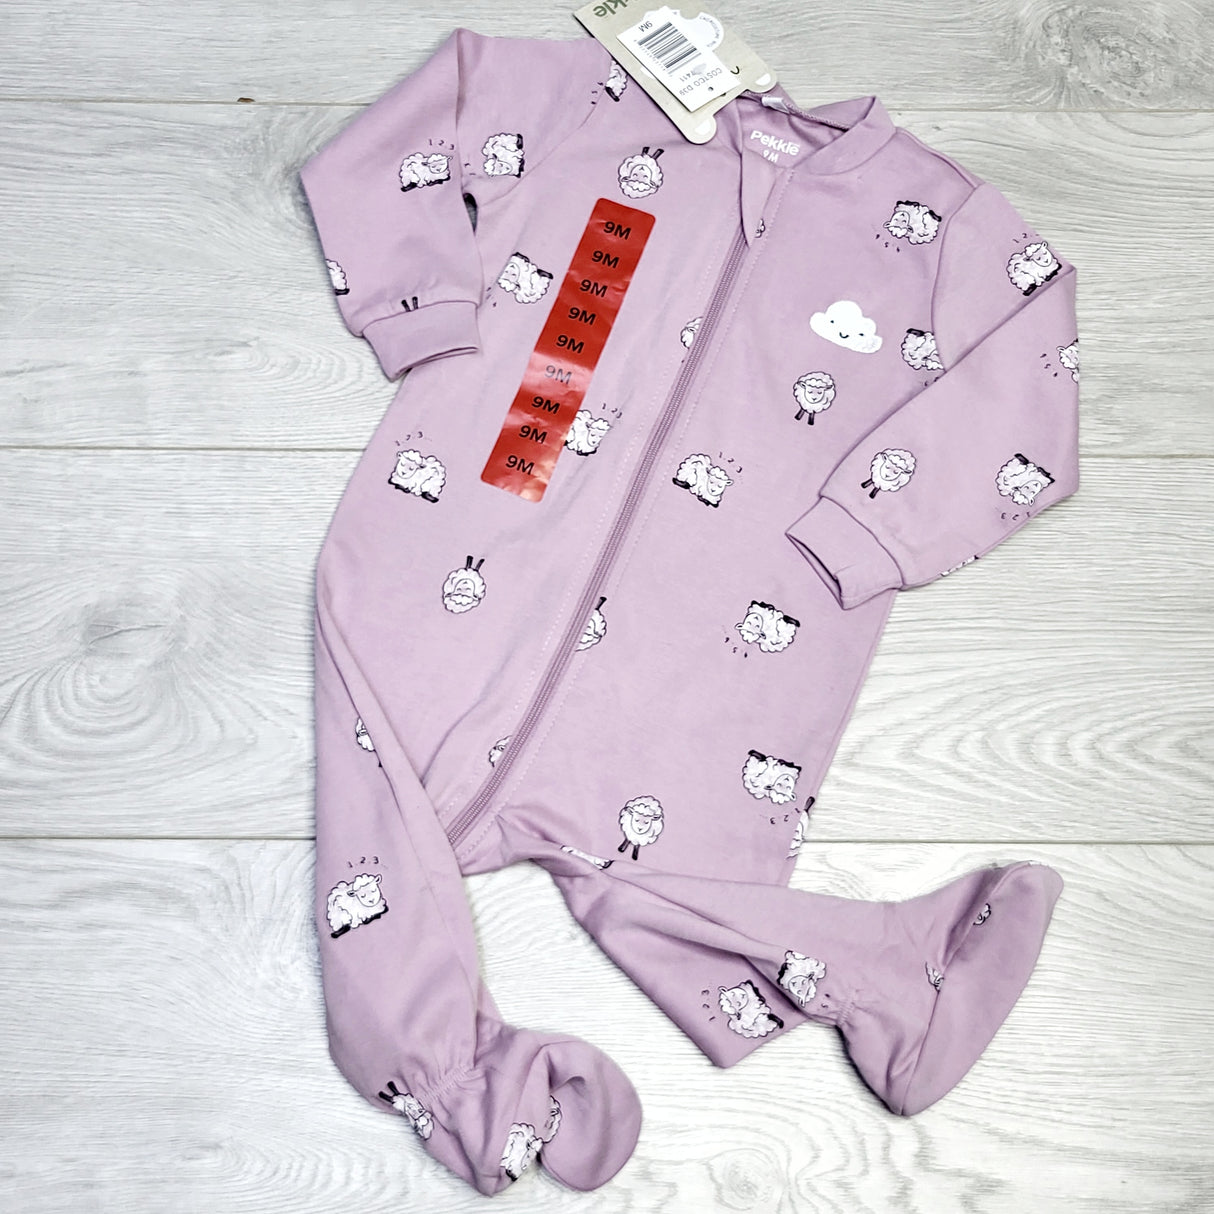 MSNDS1 - NEW - Pekkle purple zippered cotton sheep sleeper. Size 9 months